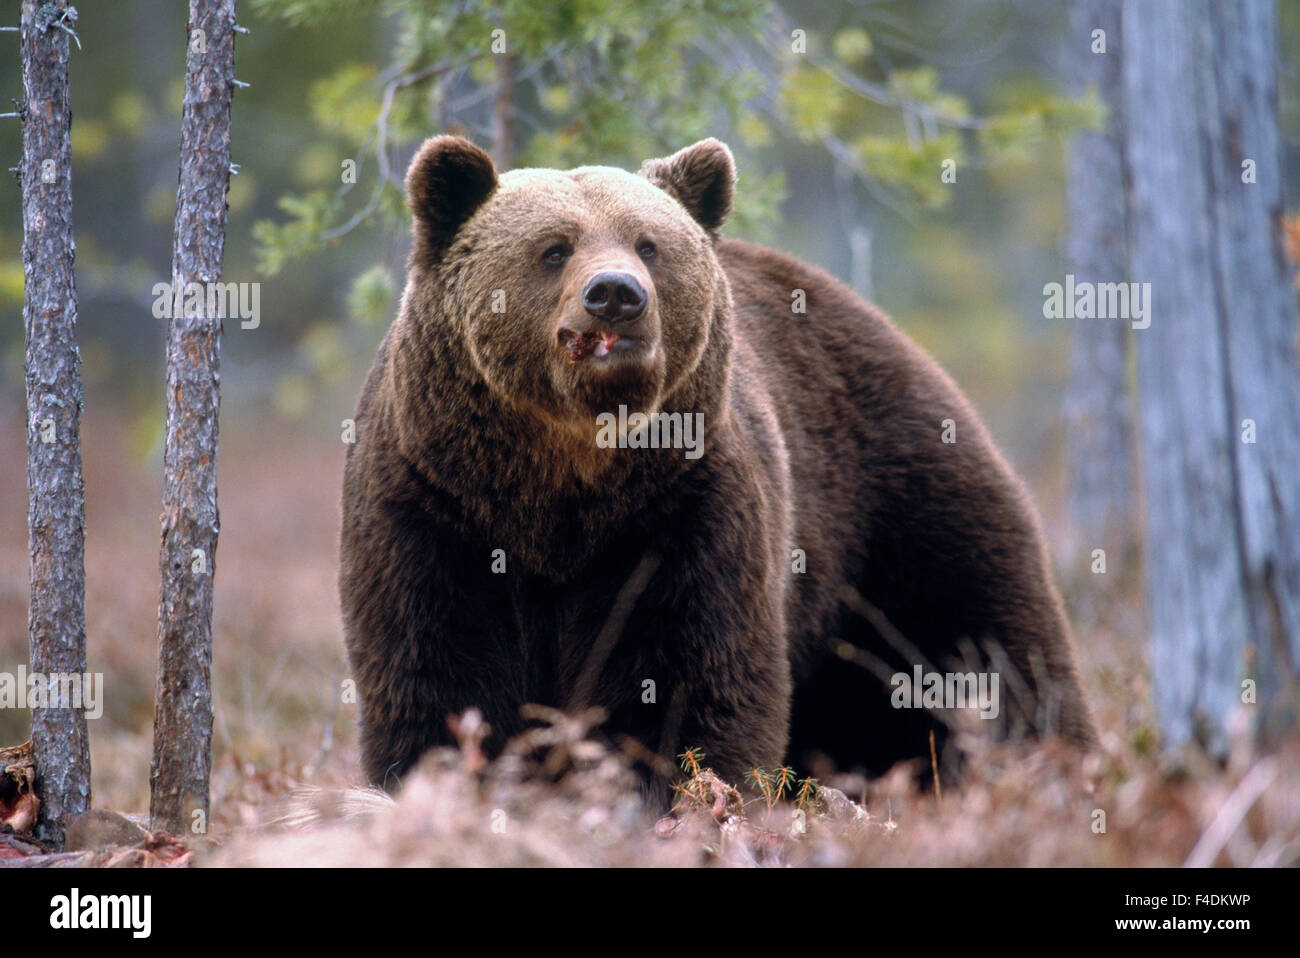 A bear in the forest. Stock Photo